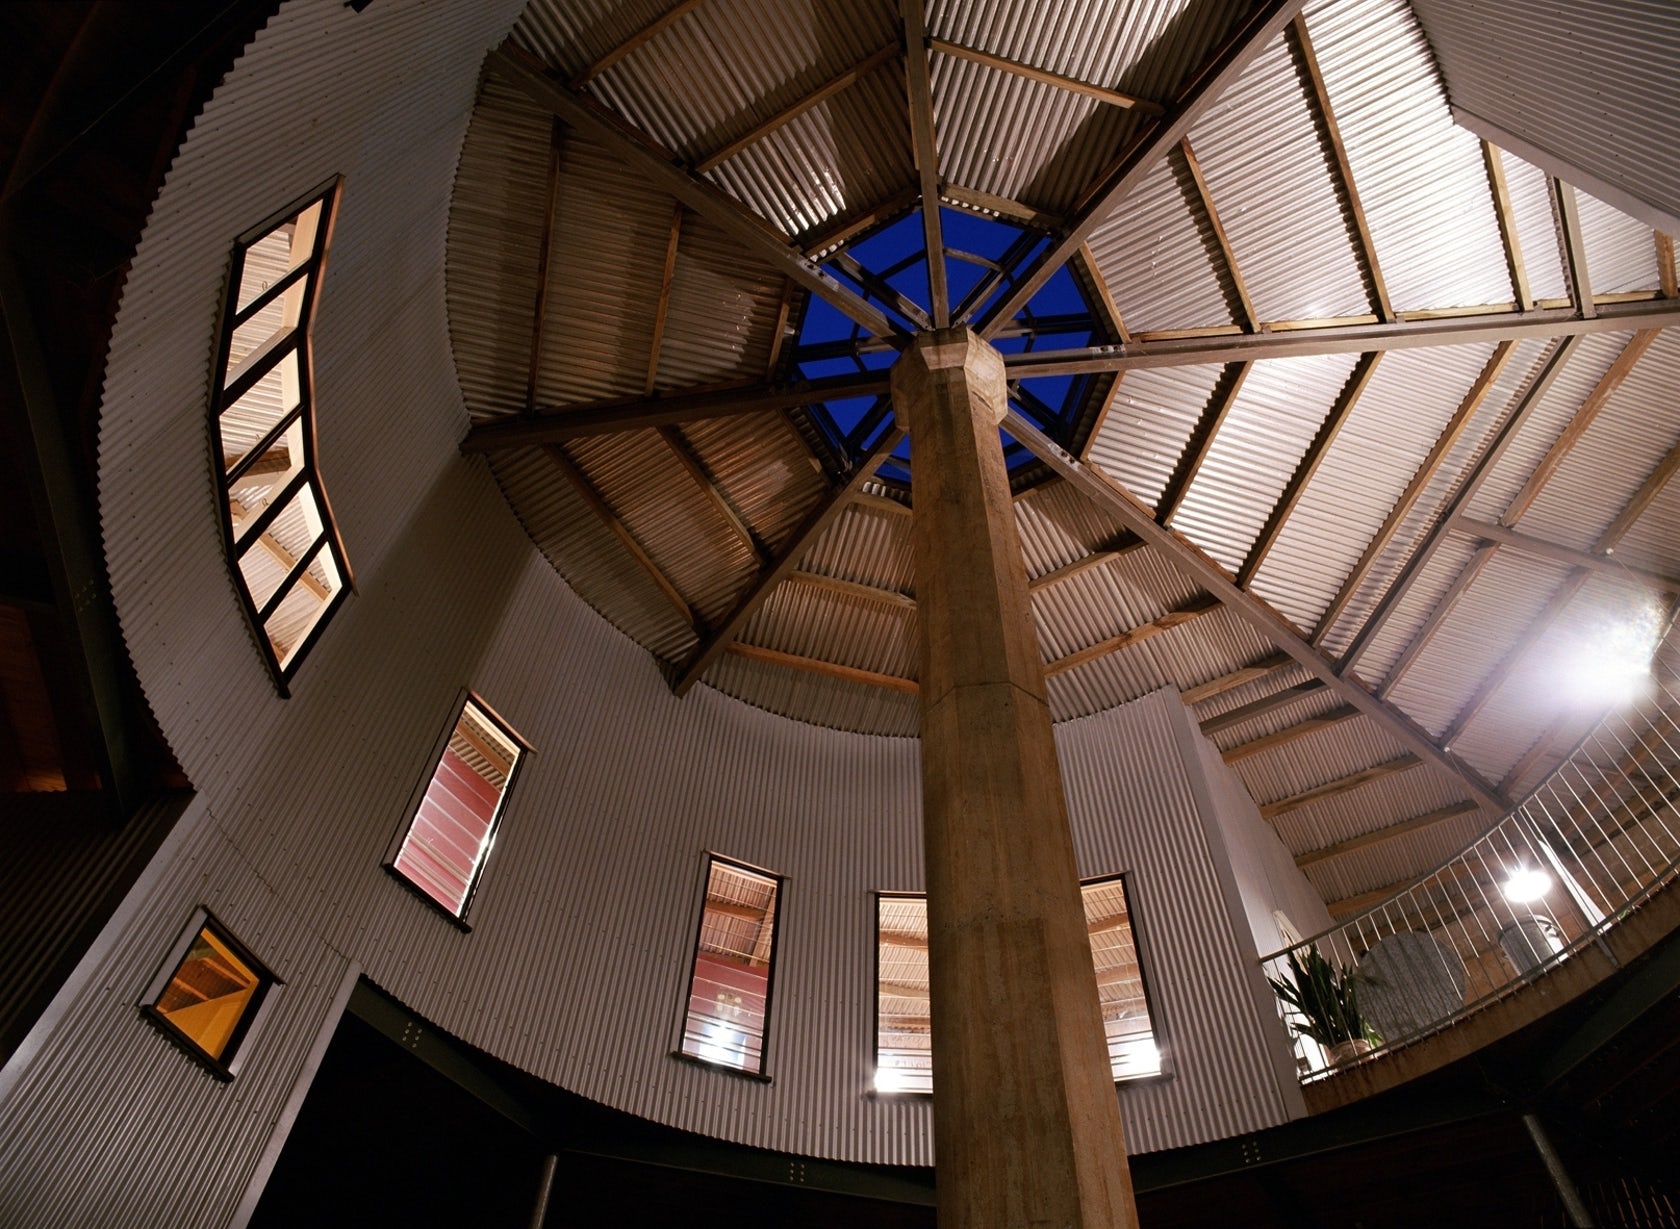 Inside the dome of the water tower house